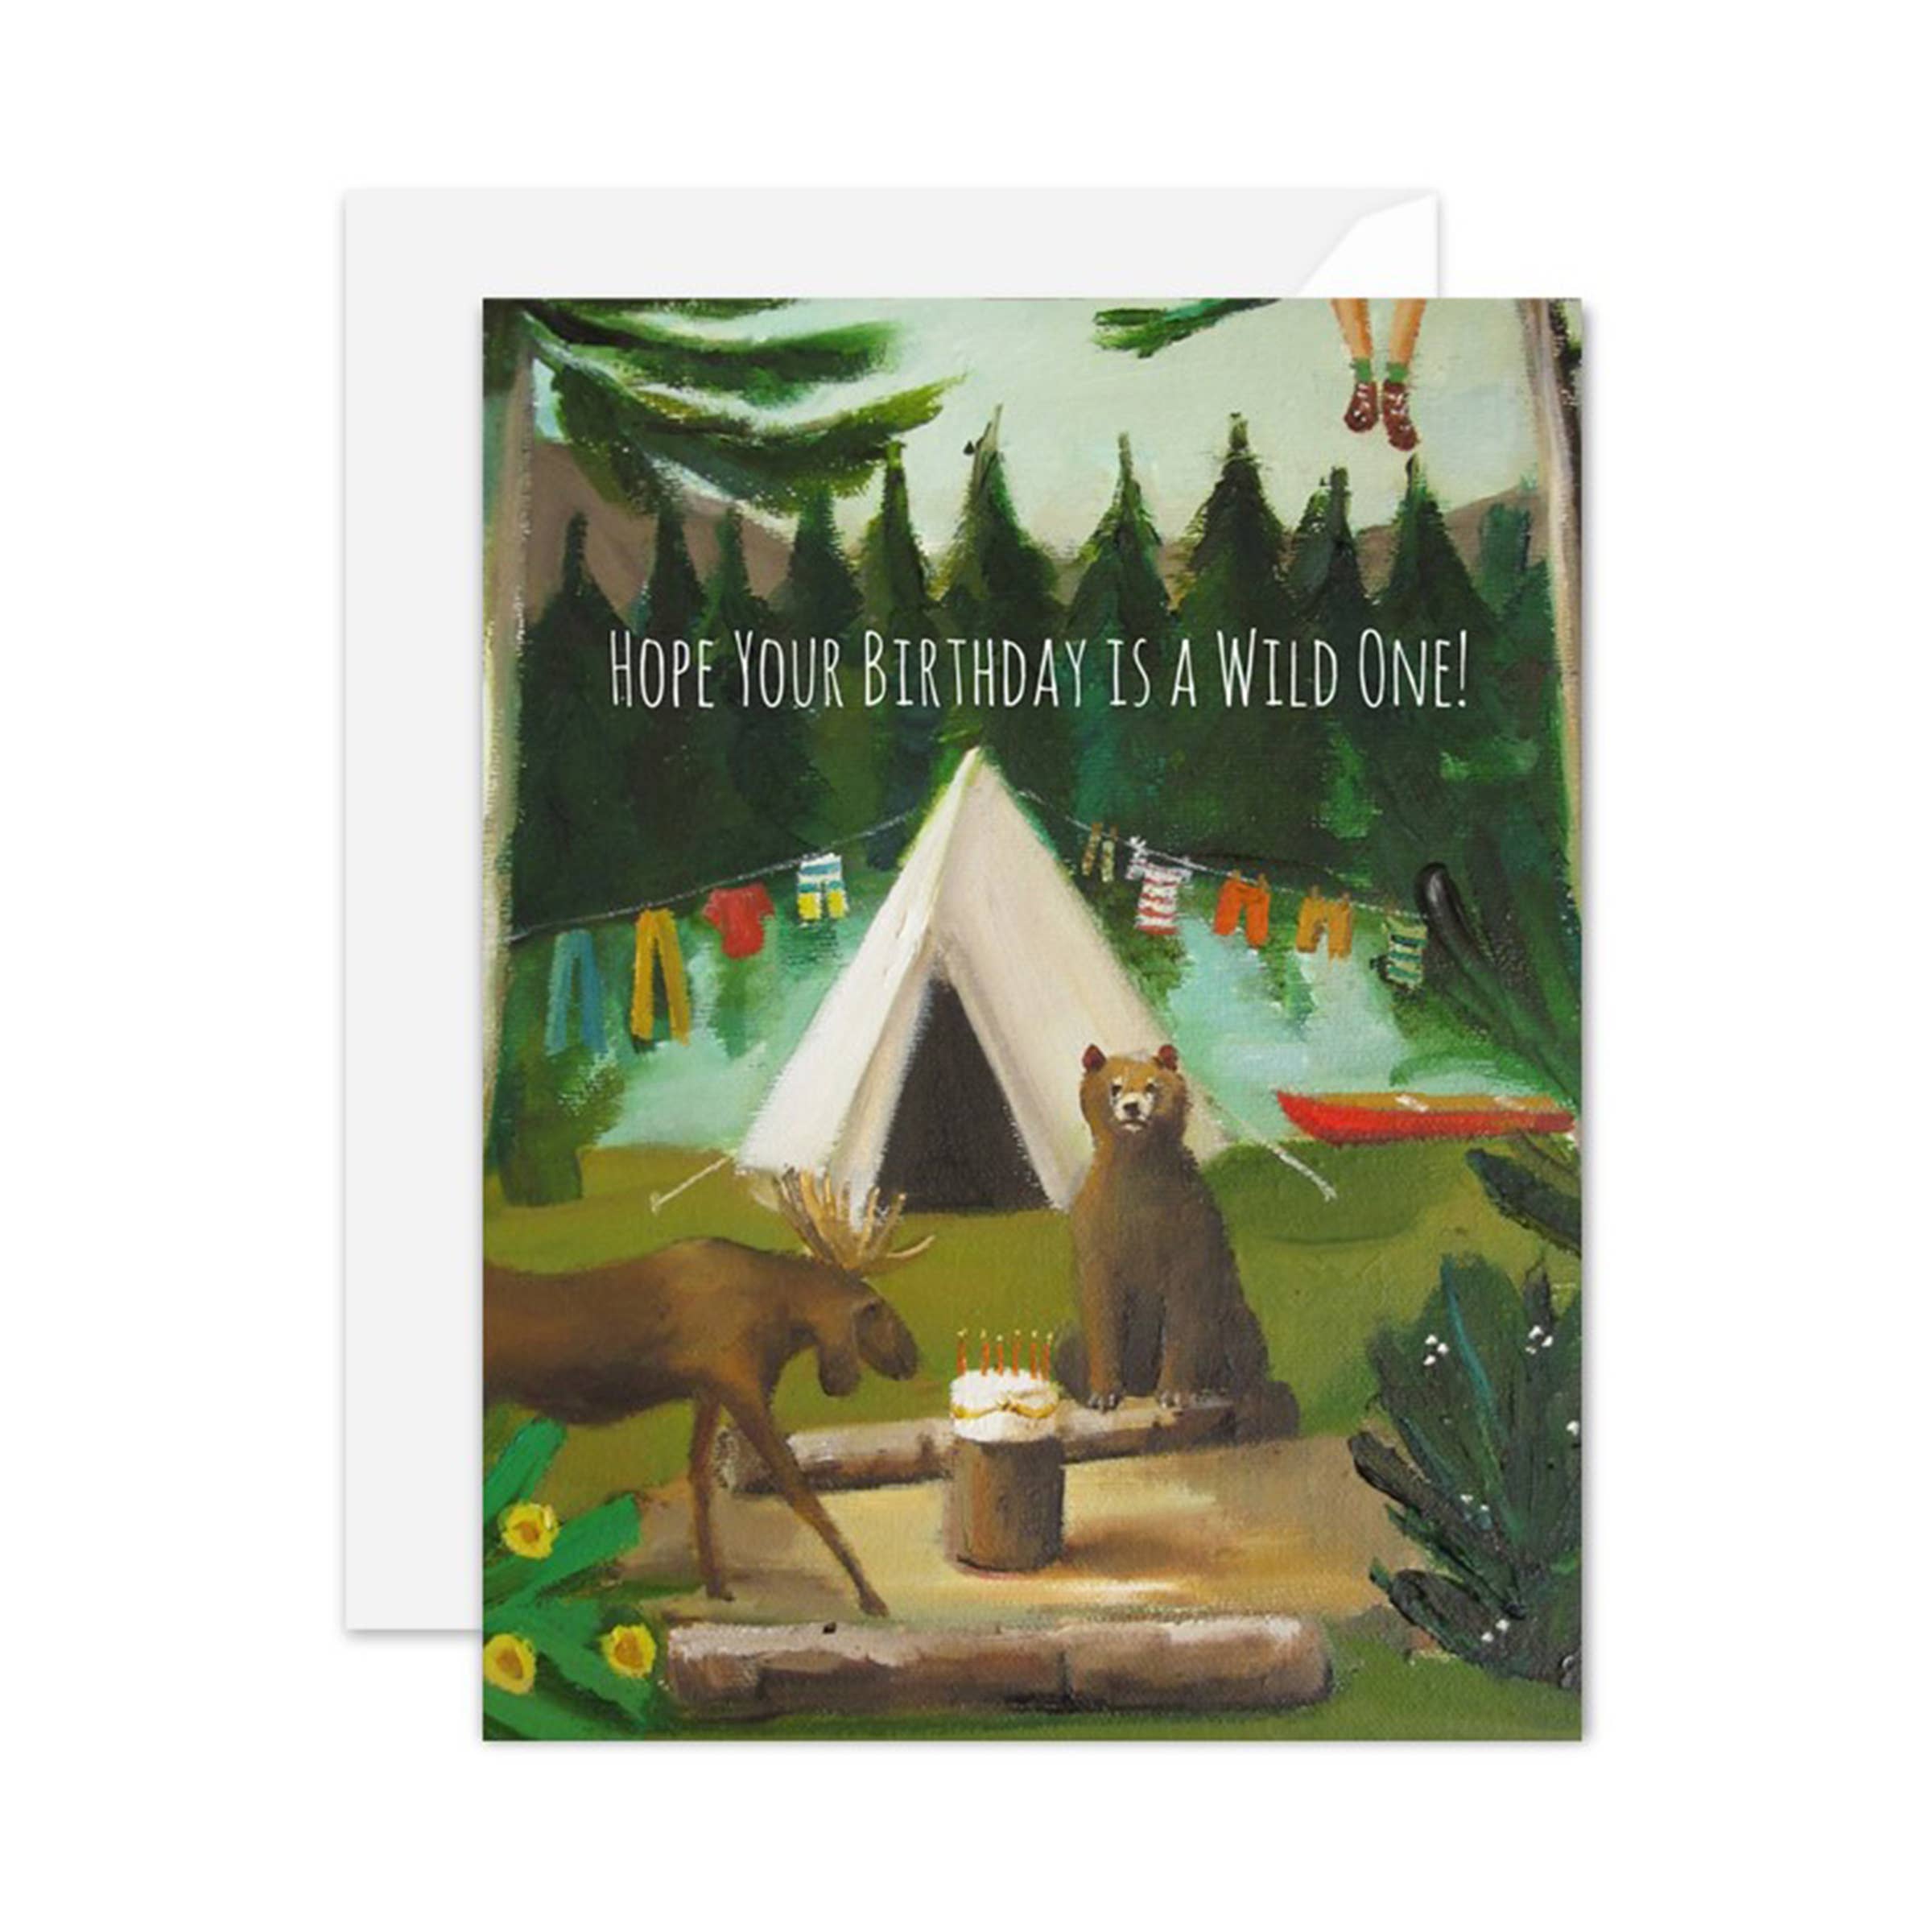 Hope Your Birthday Is A Wild One! Card